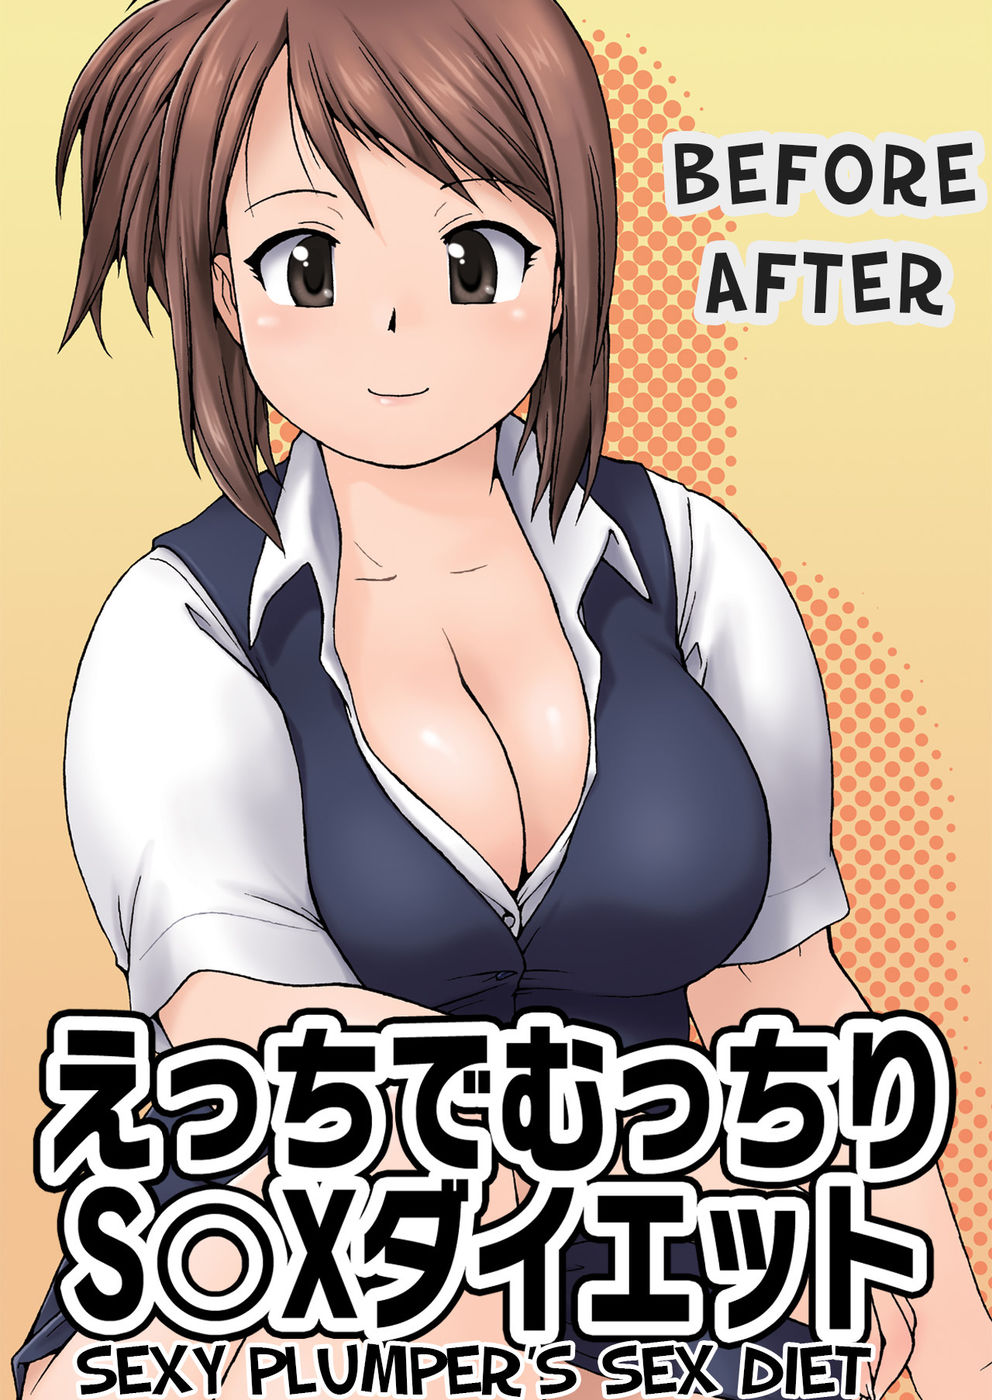 Hentai Manga Comic-Before After, Sexy Plumper's Sex Diet-Read-1